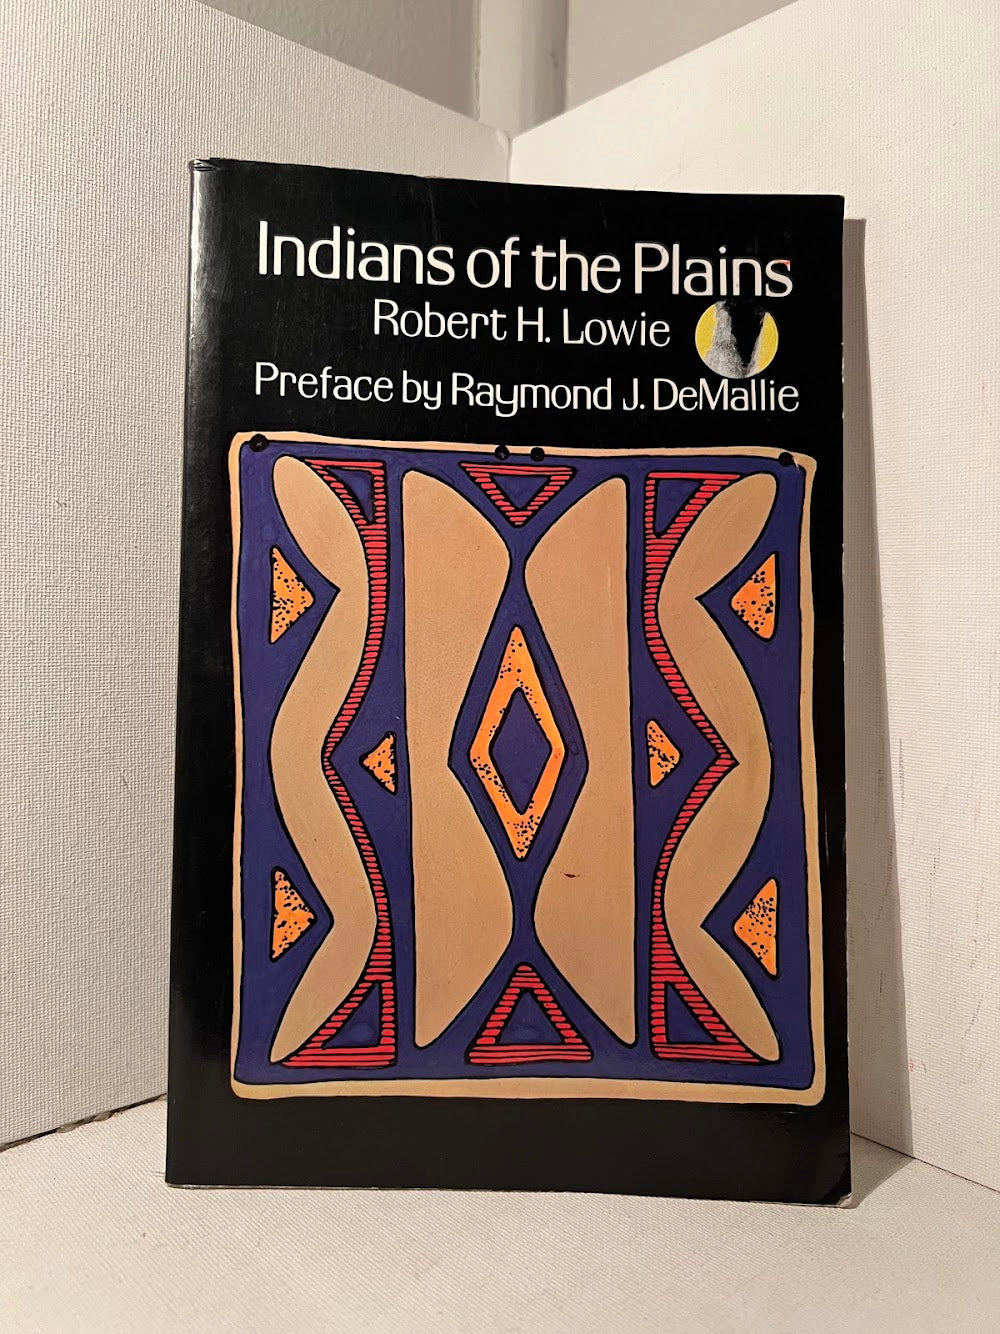 Indians of the Plains by Robert H. Lowie